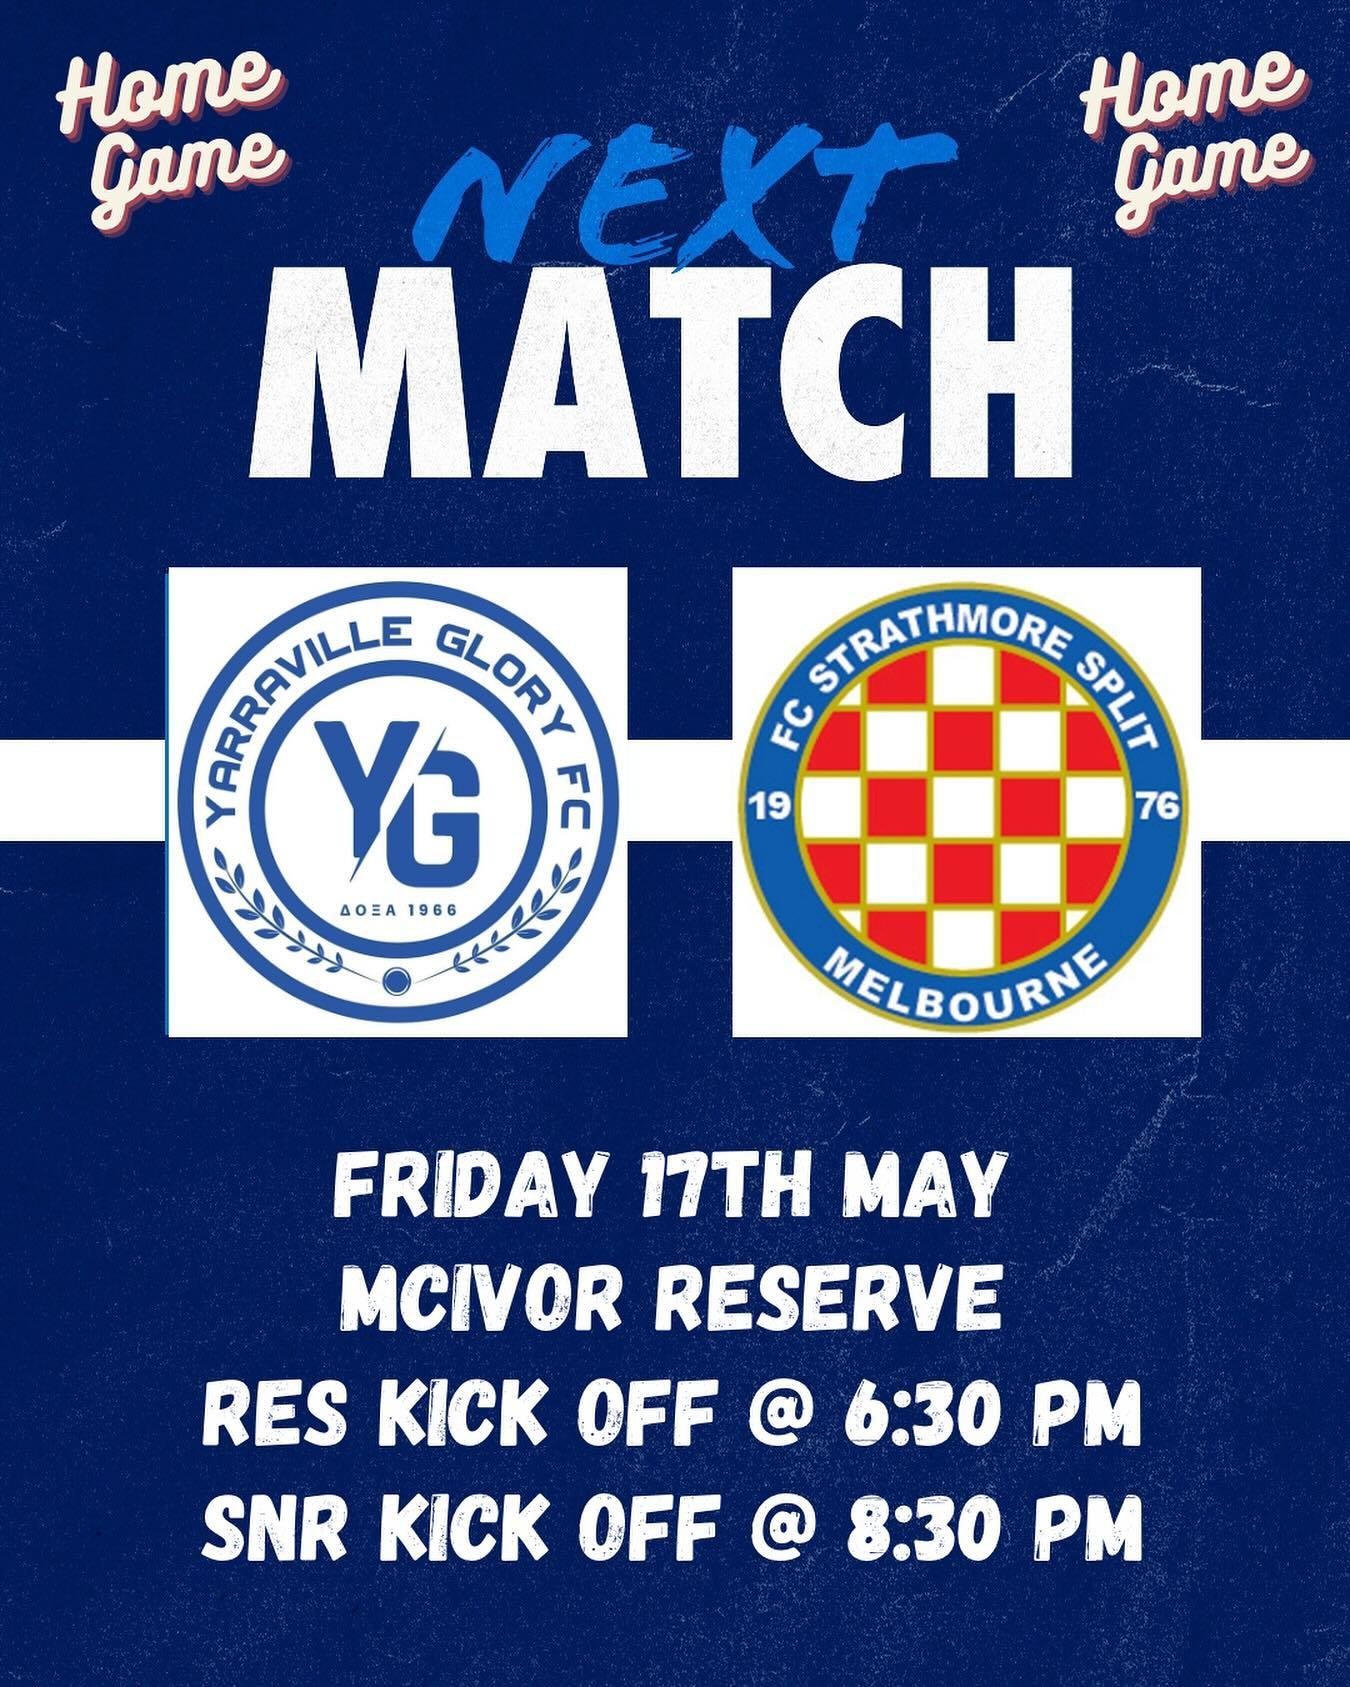 Our Senior Men and Reserve teams are back home at McIvor this Friday night.  Get along to watch the Reserves from 6:30pm and Seniors at 8:30pm as we take on FC Strathmore #doxa #glory #ygfc